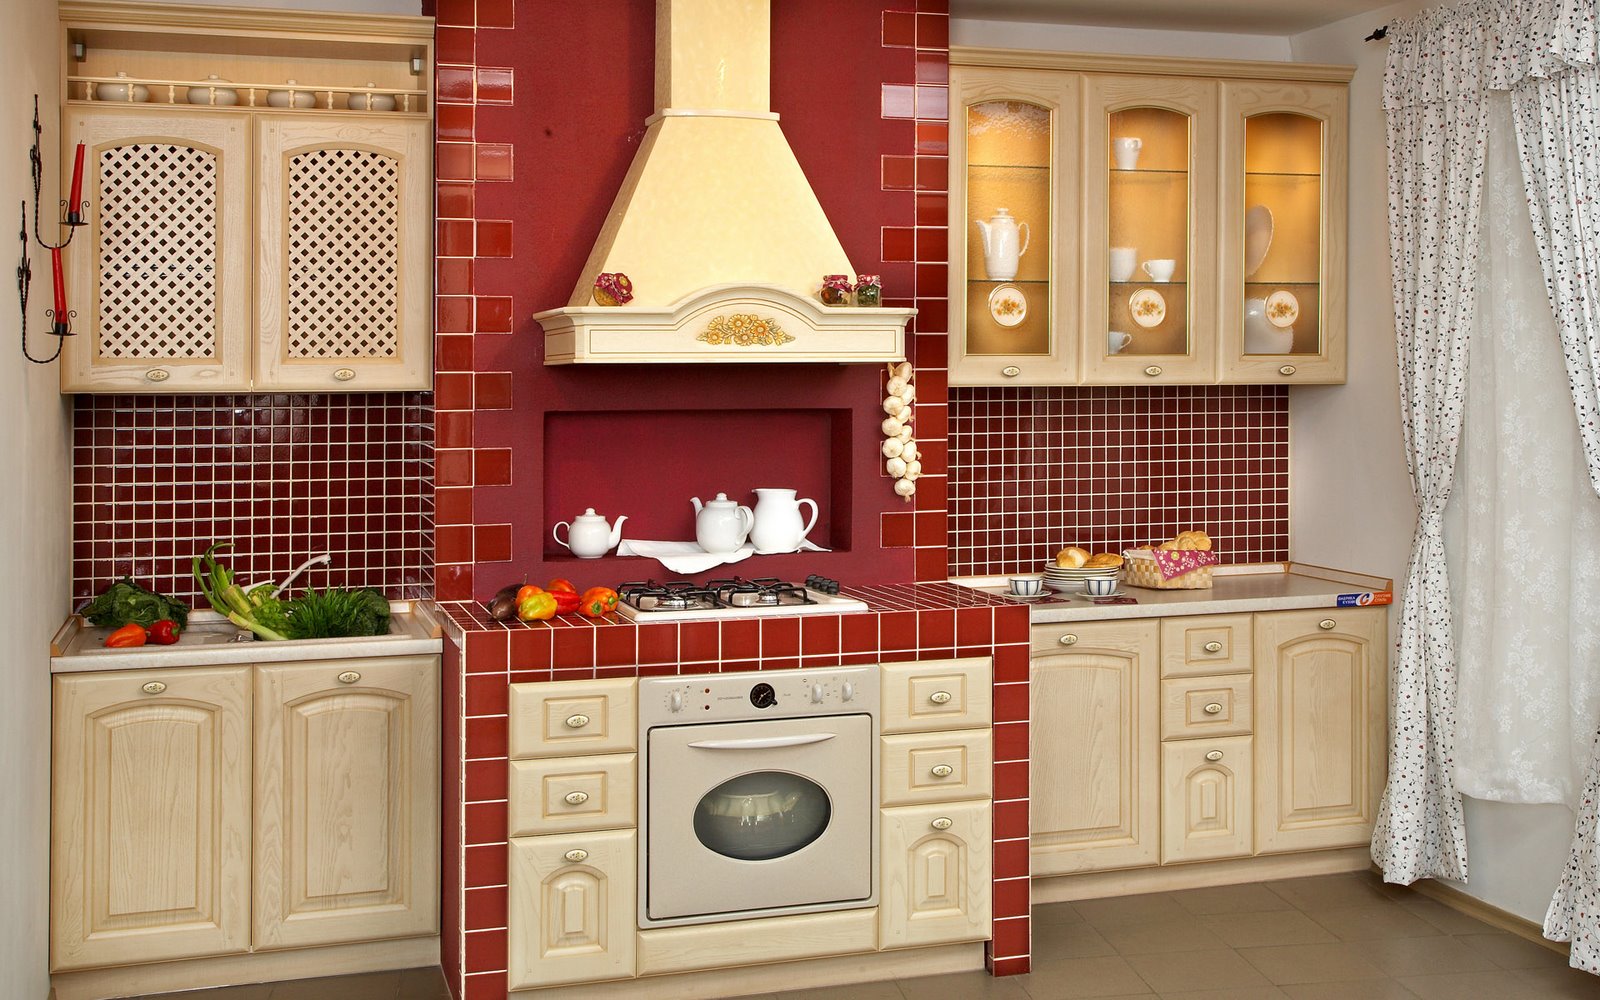 Kitchen Cupboards Red Amazing Kitchen Cupboards Design In Red Mansion Style Charming Old World Look Made From Cream Wooden Material For Inspiration Kitchens Stylish Kitchen Cupboards Design For Minimalist Kitchen Appearance